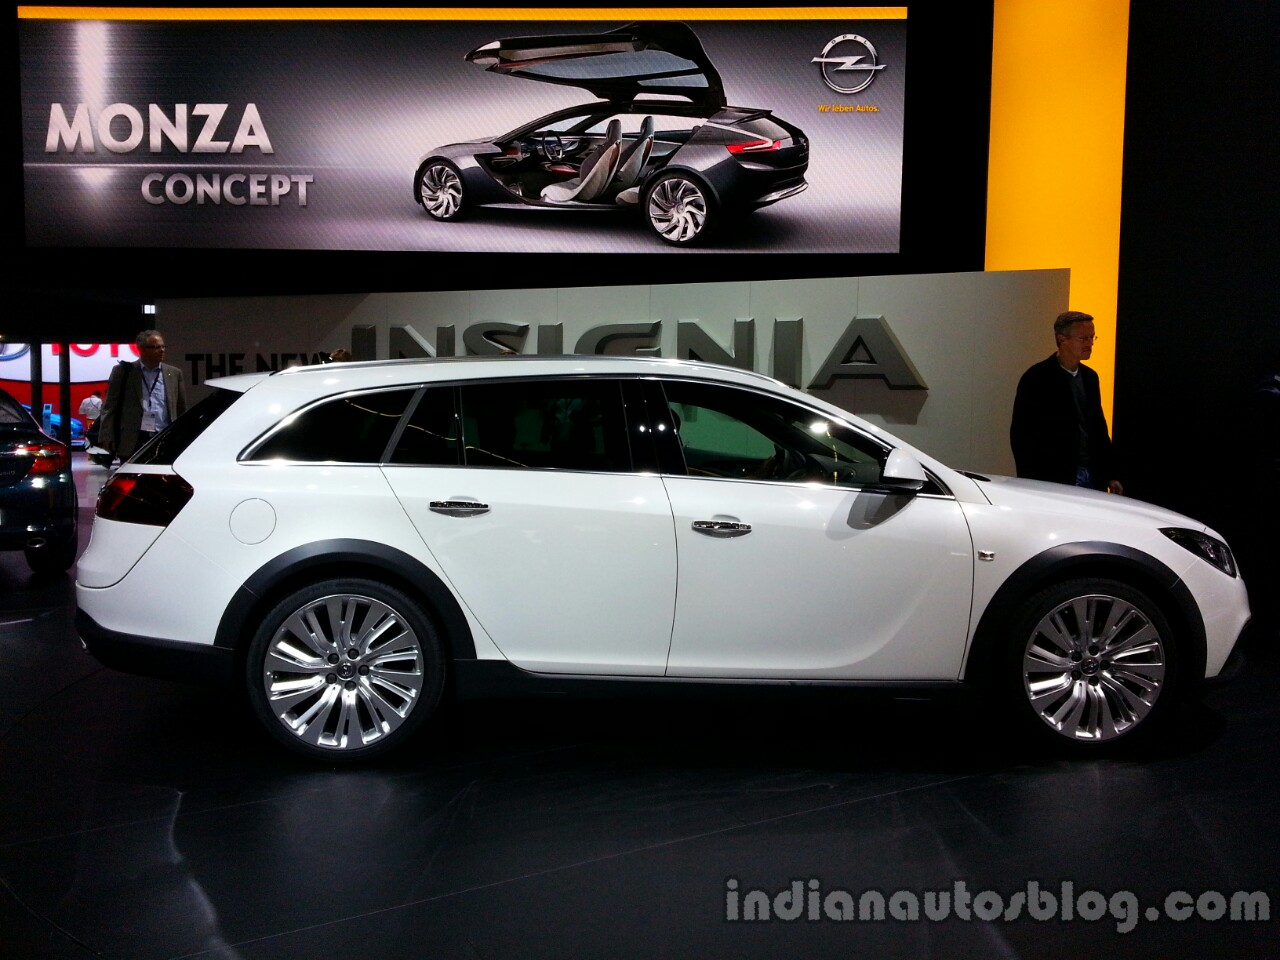 2014 Opel Insignia Country Tourer Pics, Vehicles Collection